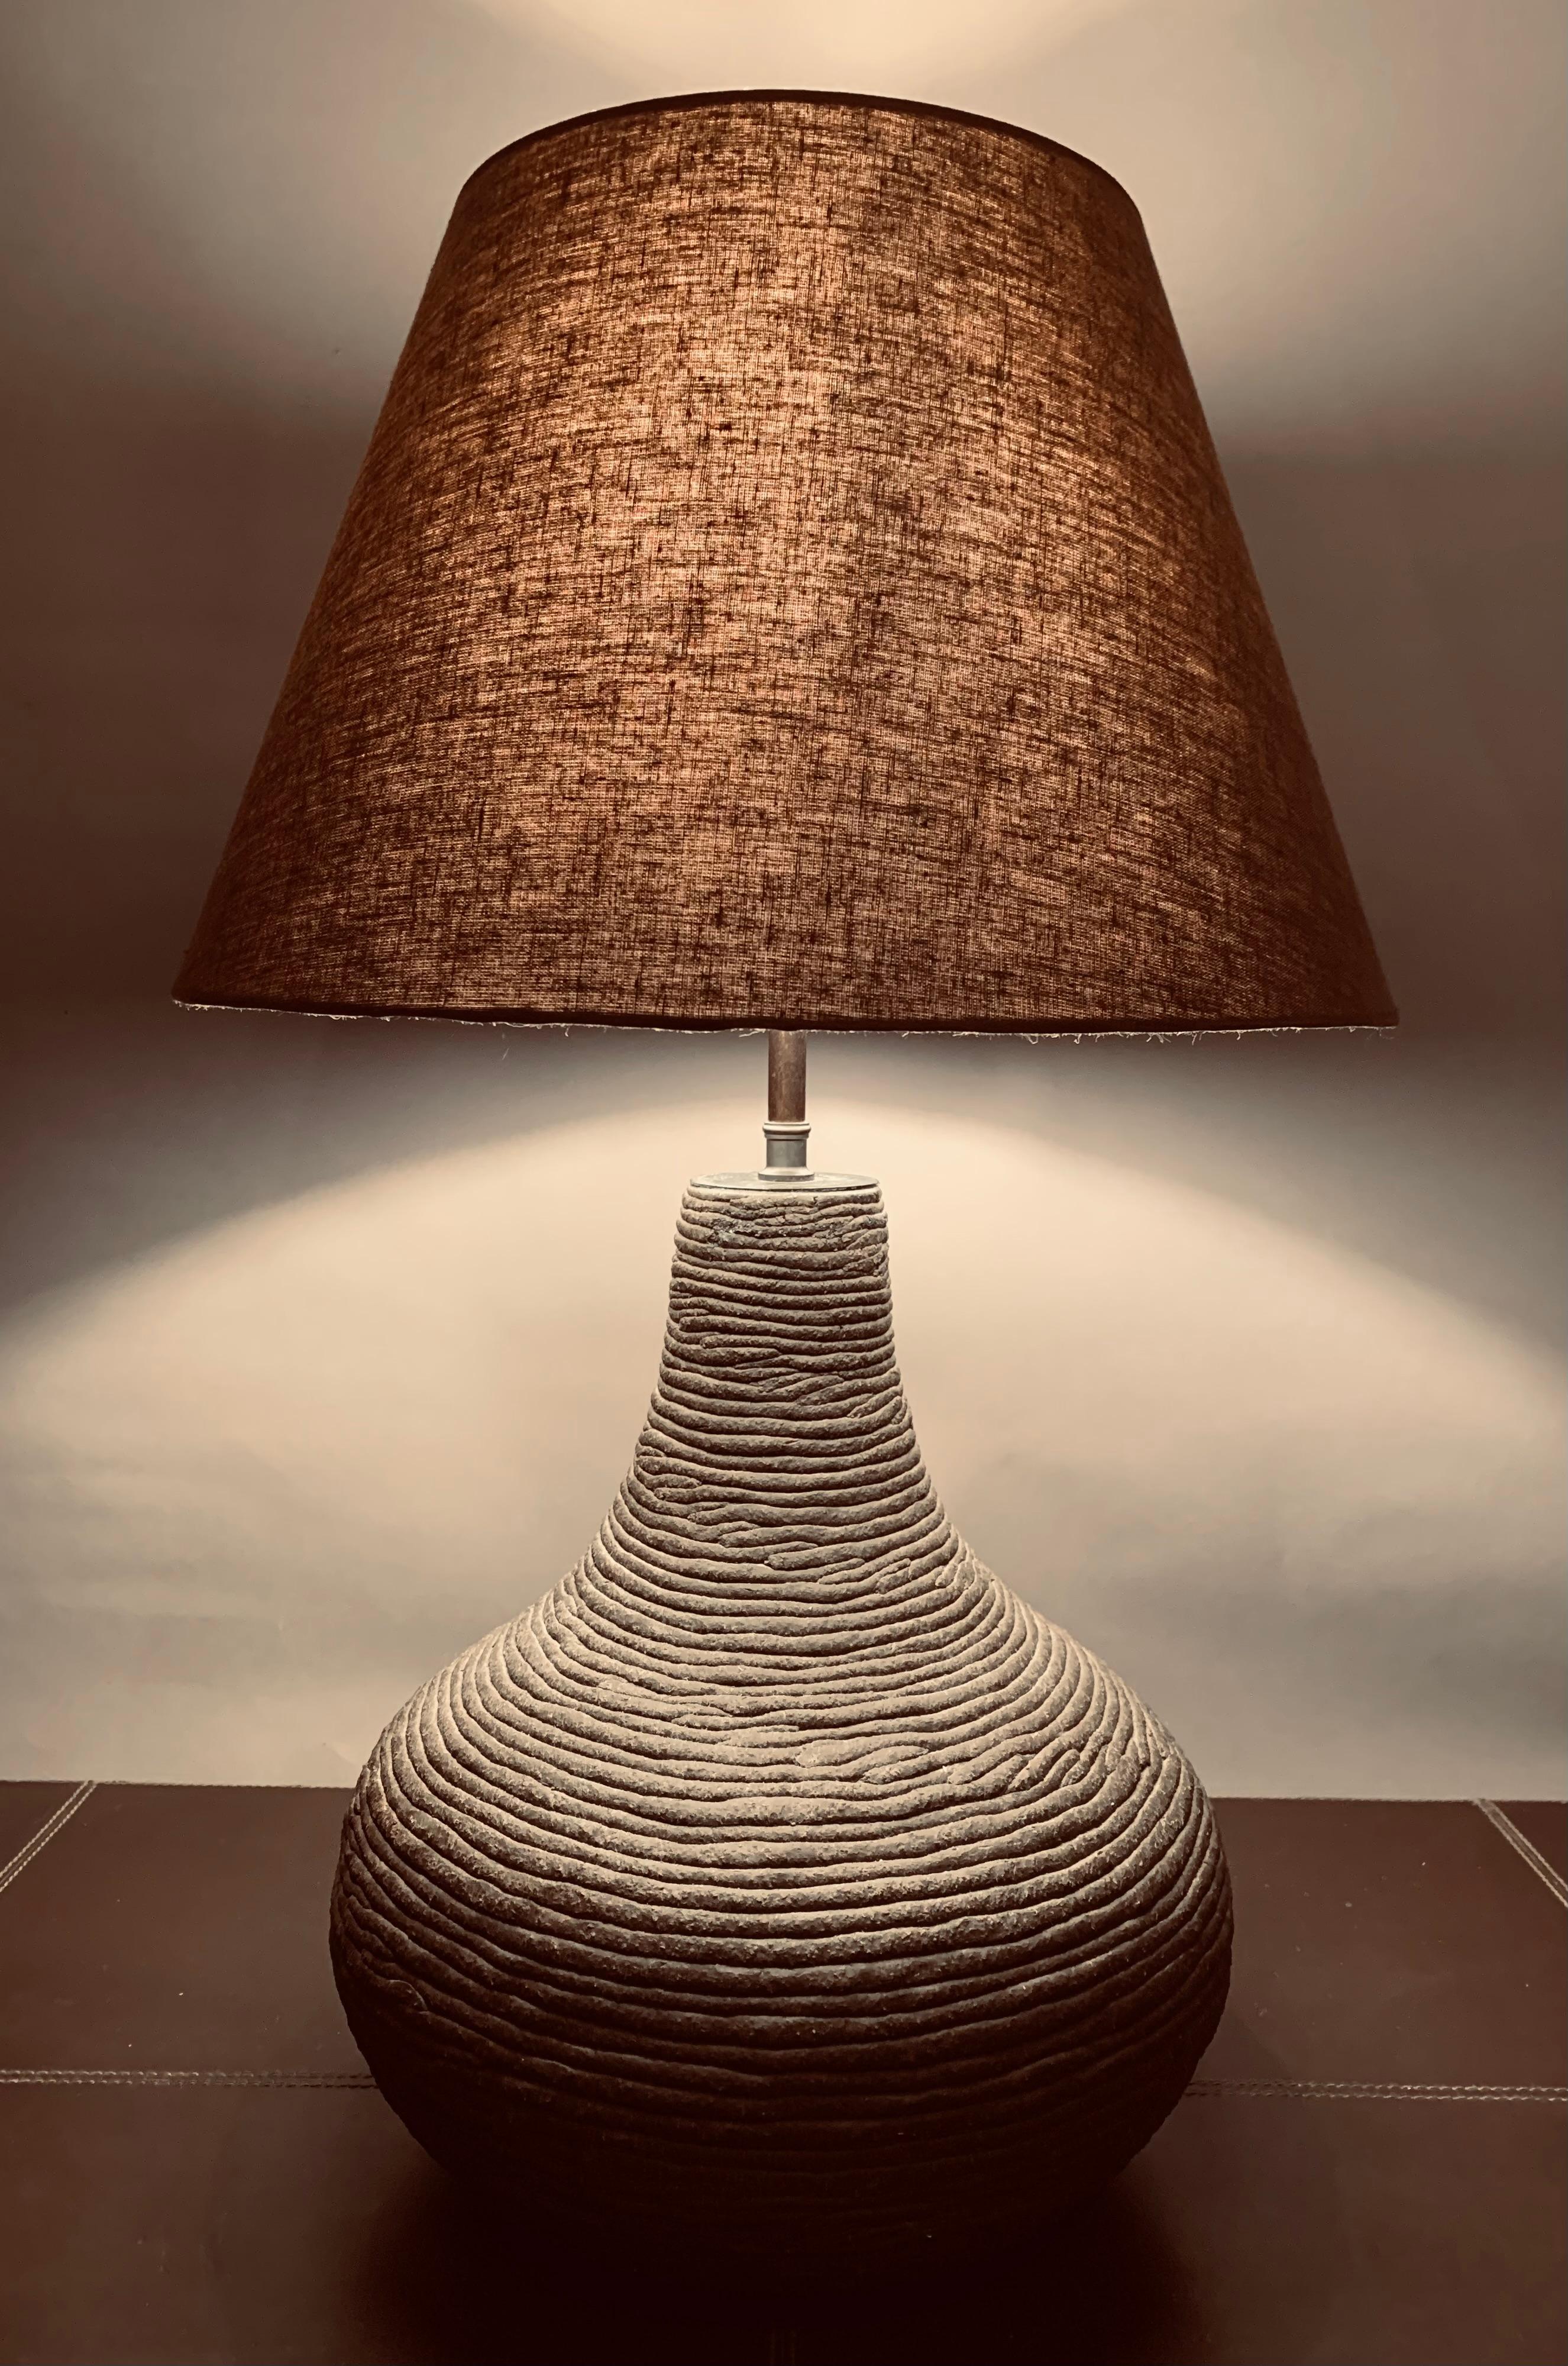 1970s German handcrafted matte chocolate brown pottery table lamp. The table lamp is interestingly constructed from very thin clay coiled into a bulbous shaped lamp, fired and glazed.

The lamp is fitted with an antique brass bulb bayonet bulb